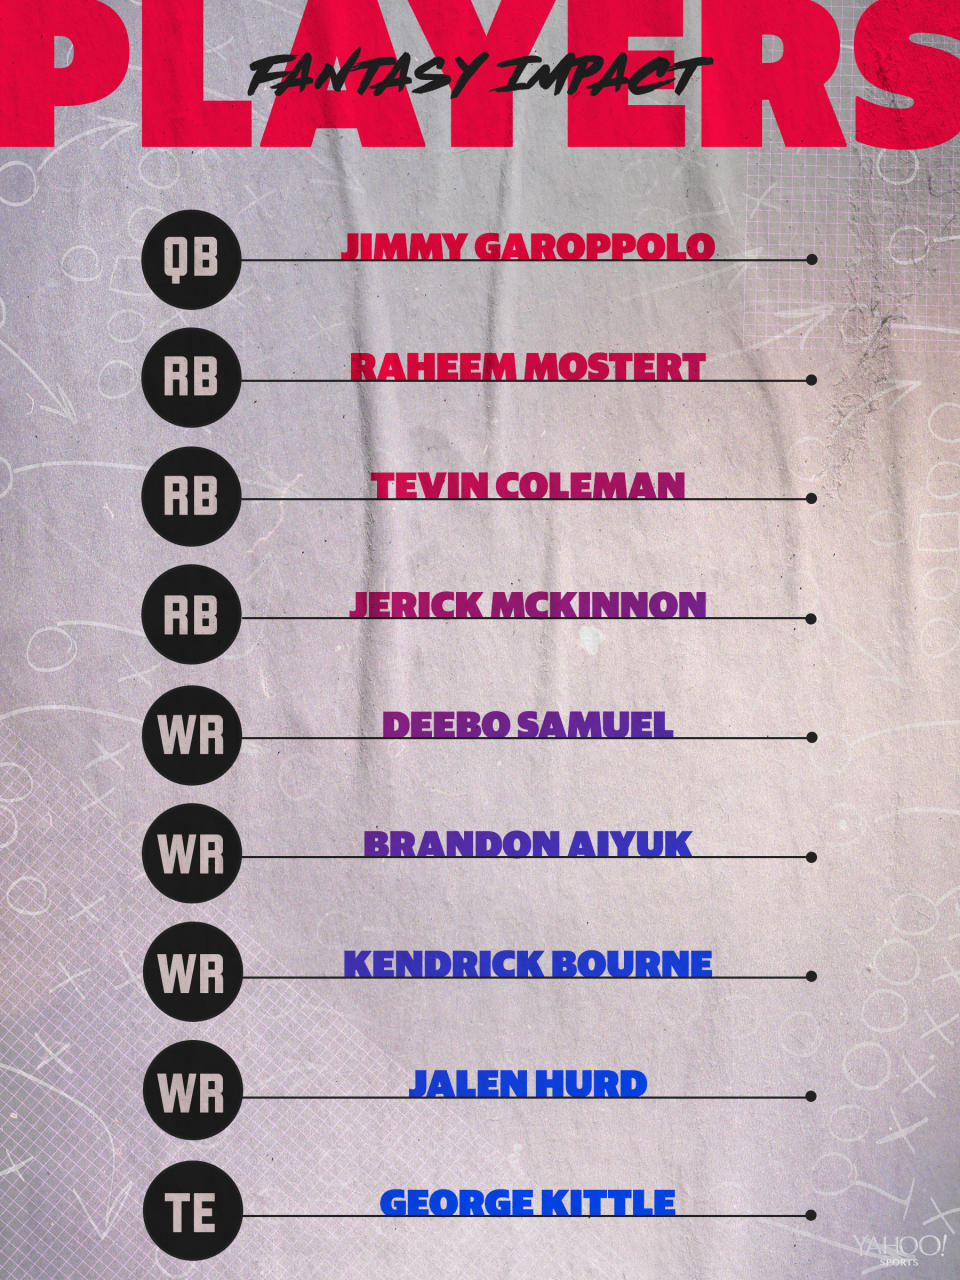 San Francisco 49ers Projected Lineup.